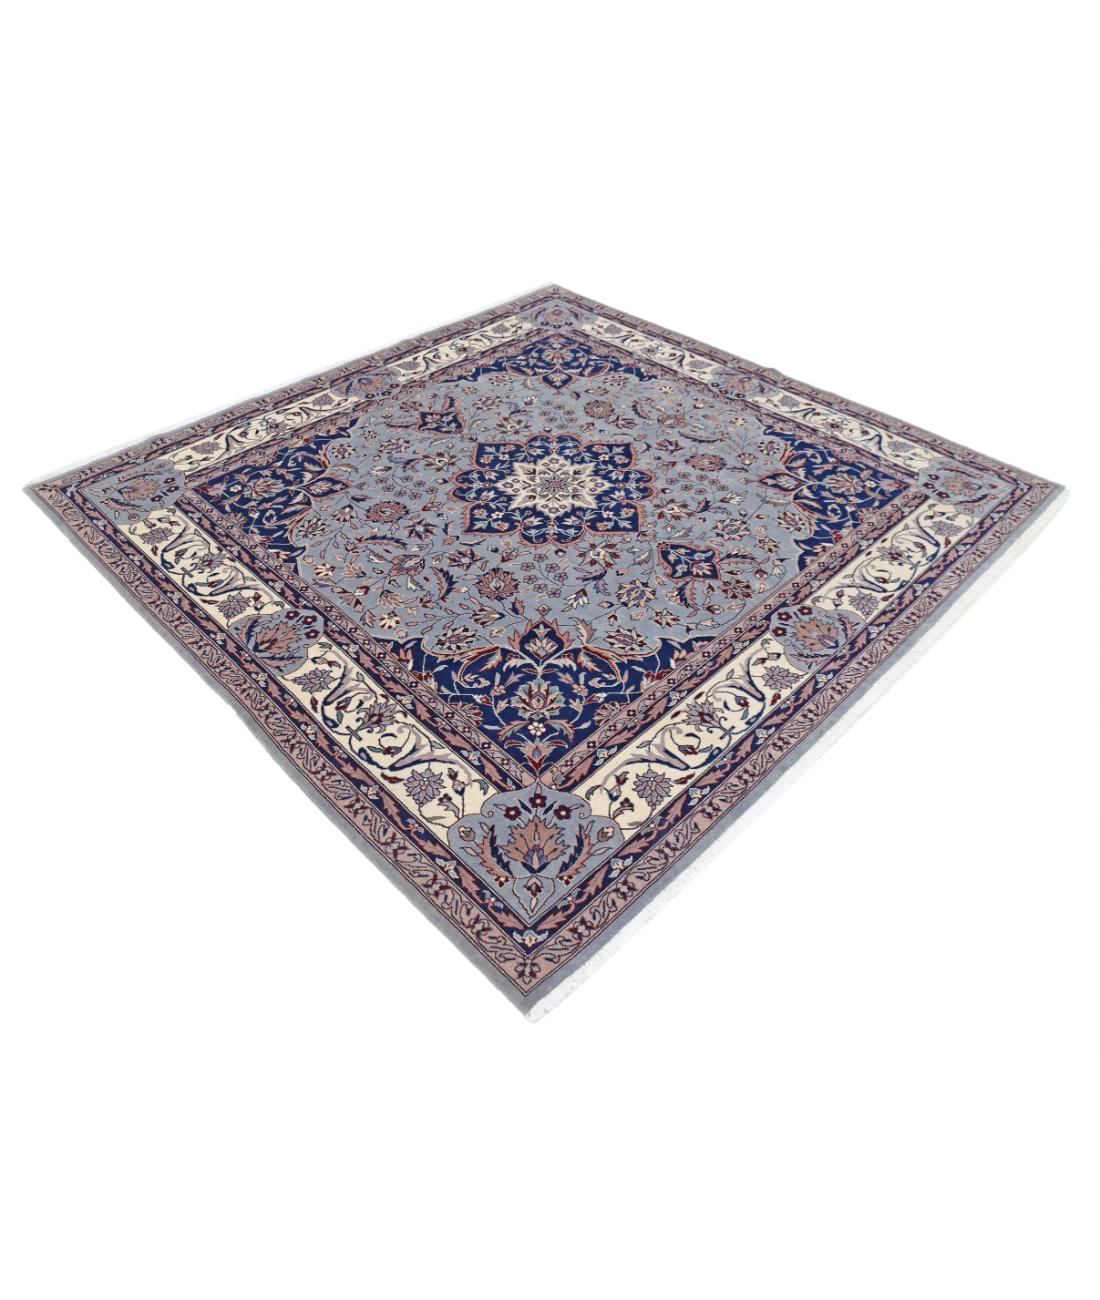 Heritage 6' 7" X 6' 10" Hand-Knotted Wool Rug 6' 7" X 6' 10" (201 X 208) / Blue / Ivory